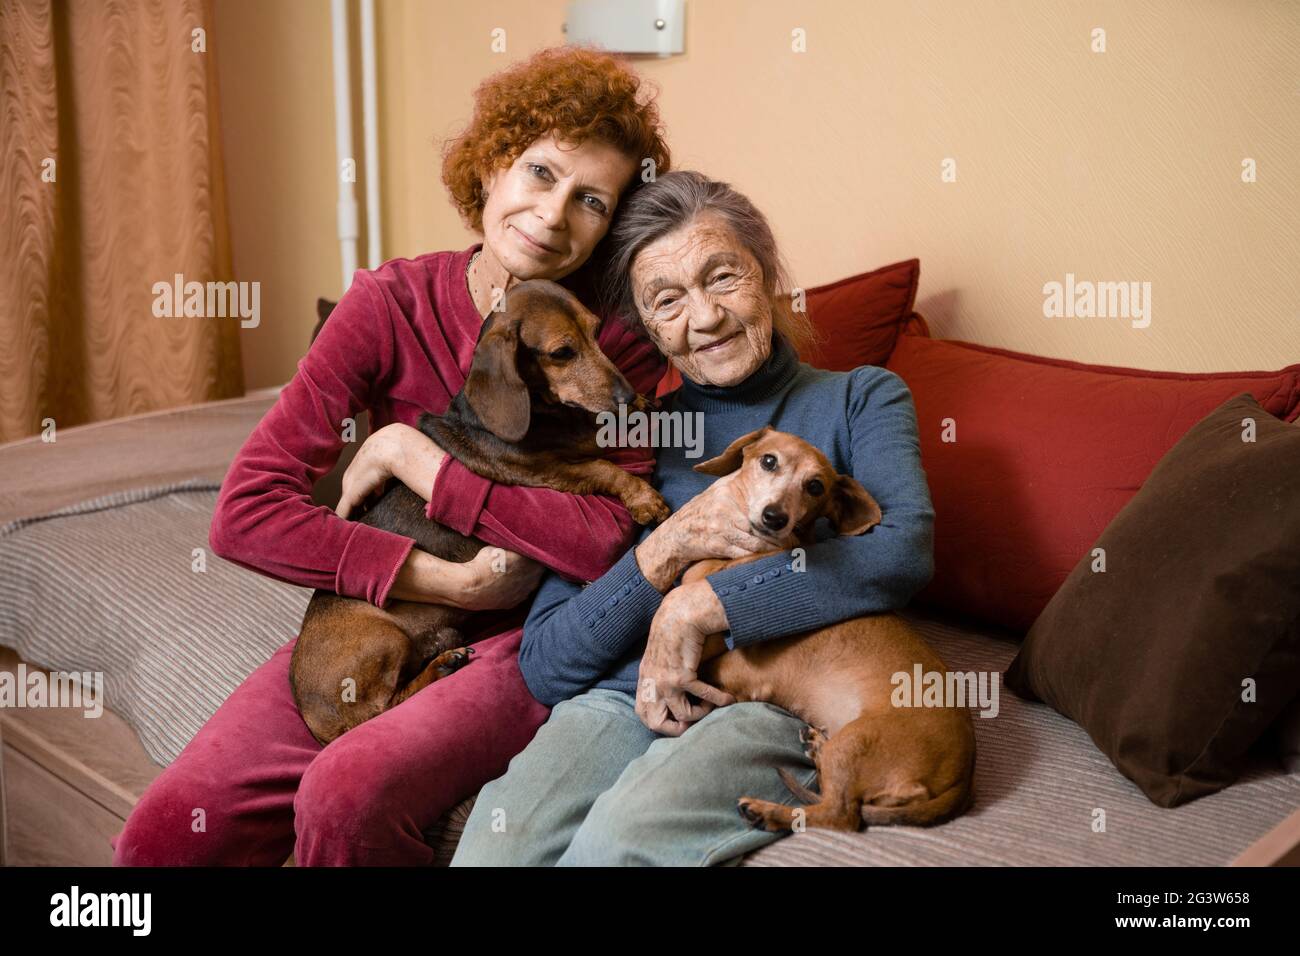 Adult woman takes care of her older mother with dementia, spending time at home with parent and dogs, smiling and happily relaxi Stock Photo